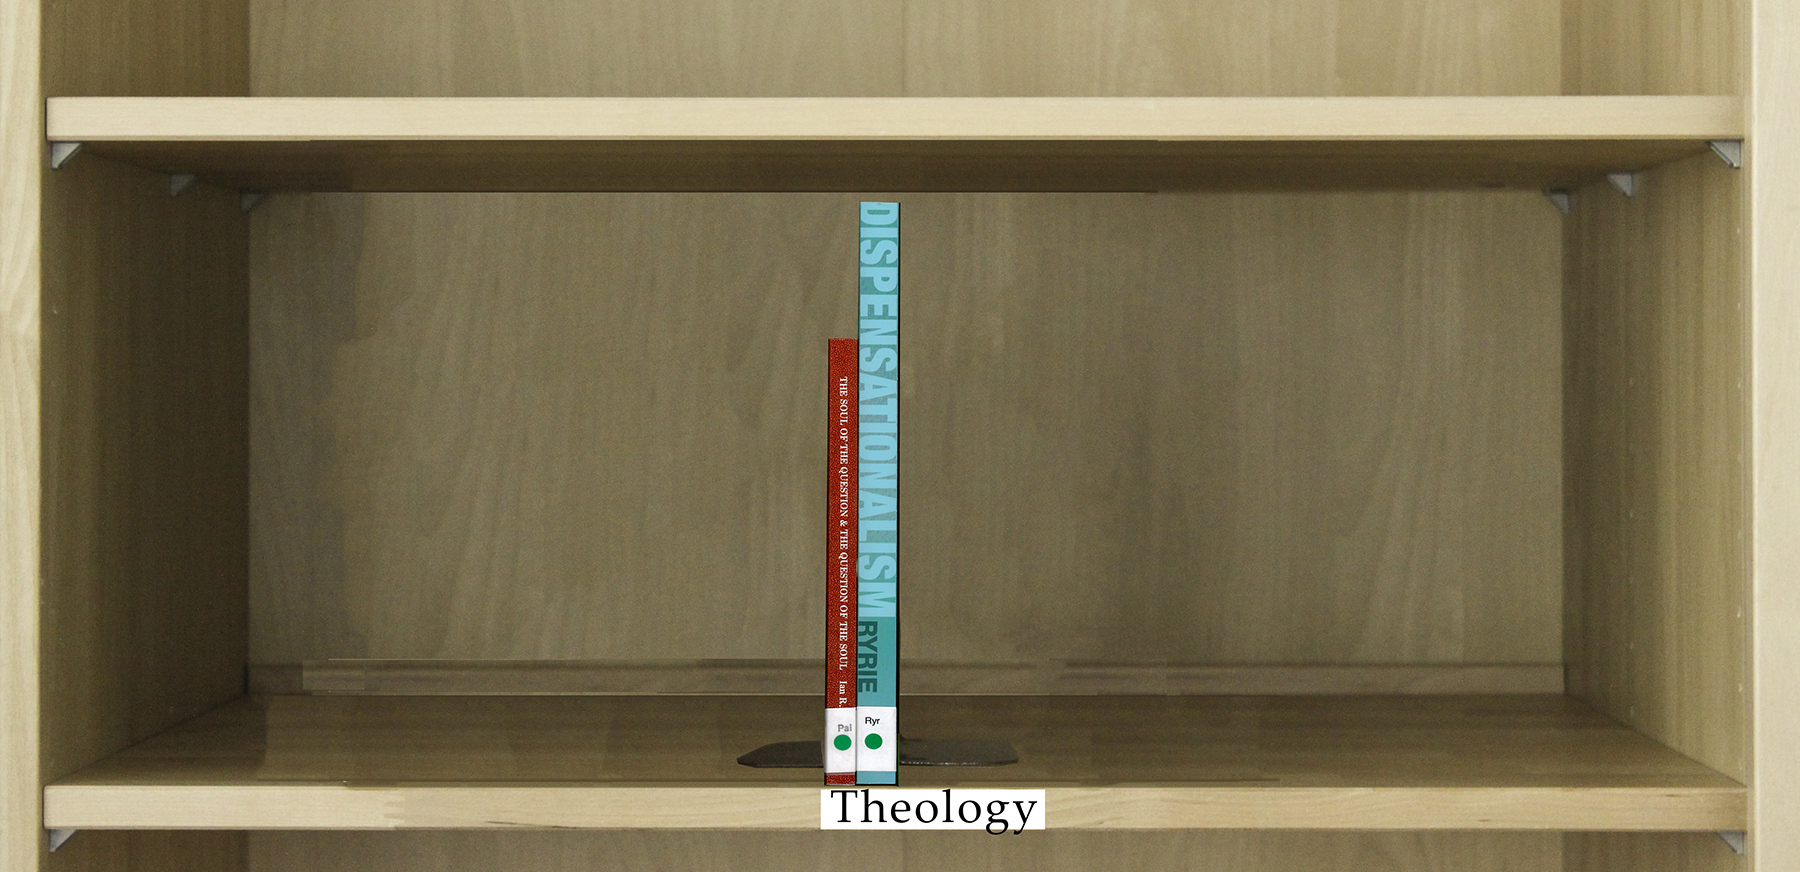 Index of Books Under the Category Theology.